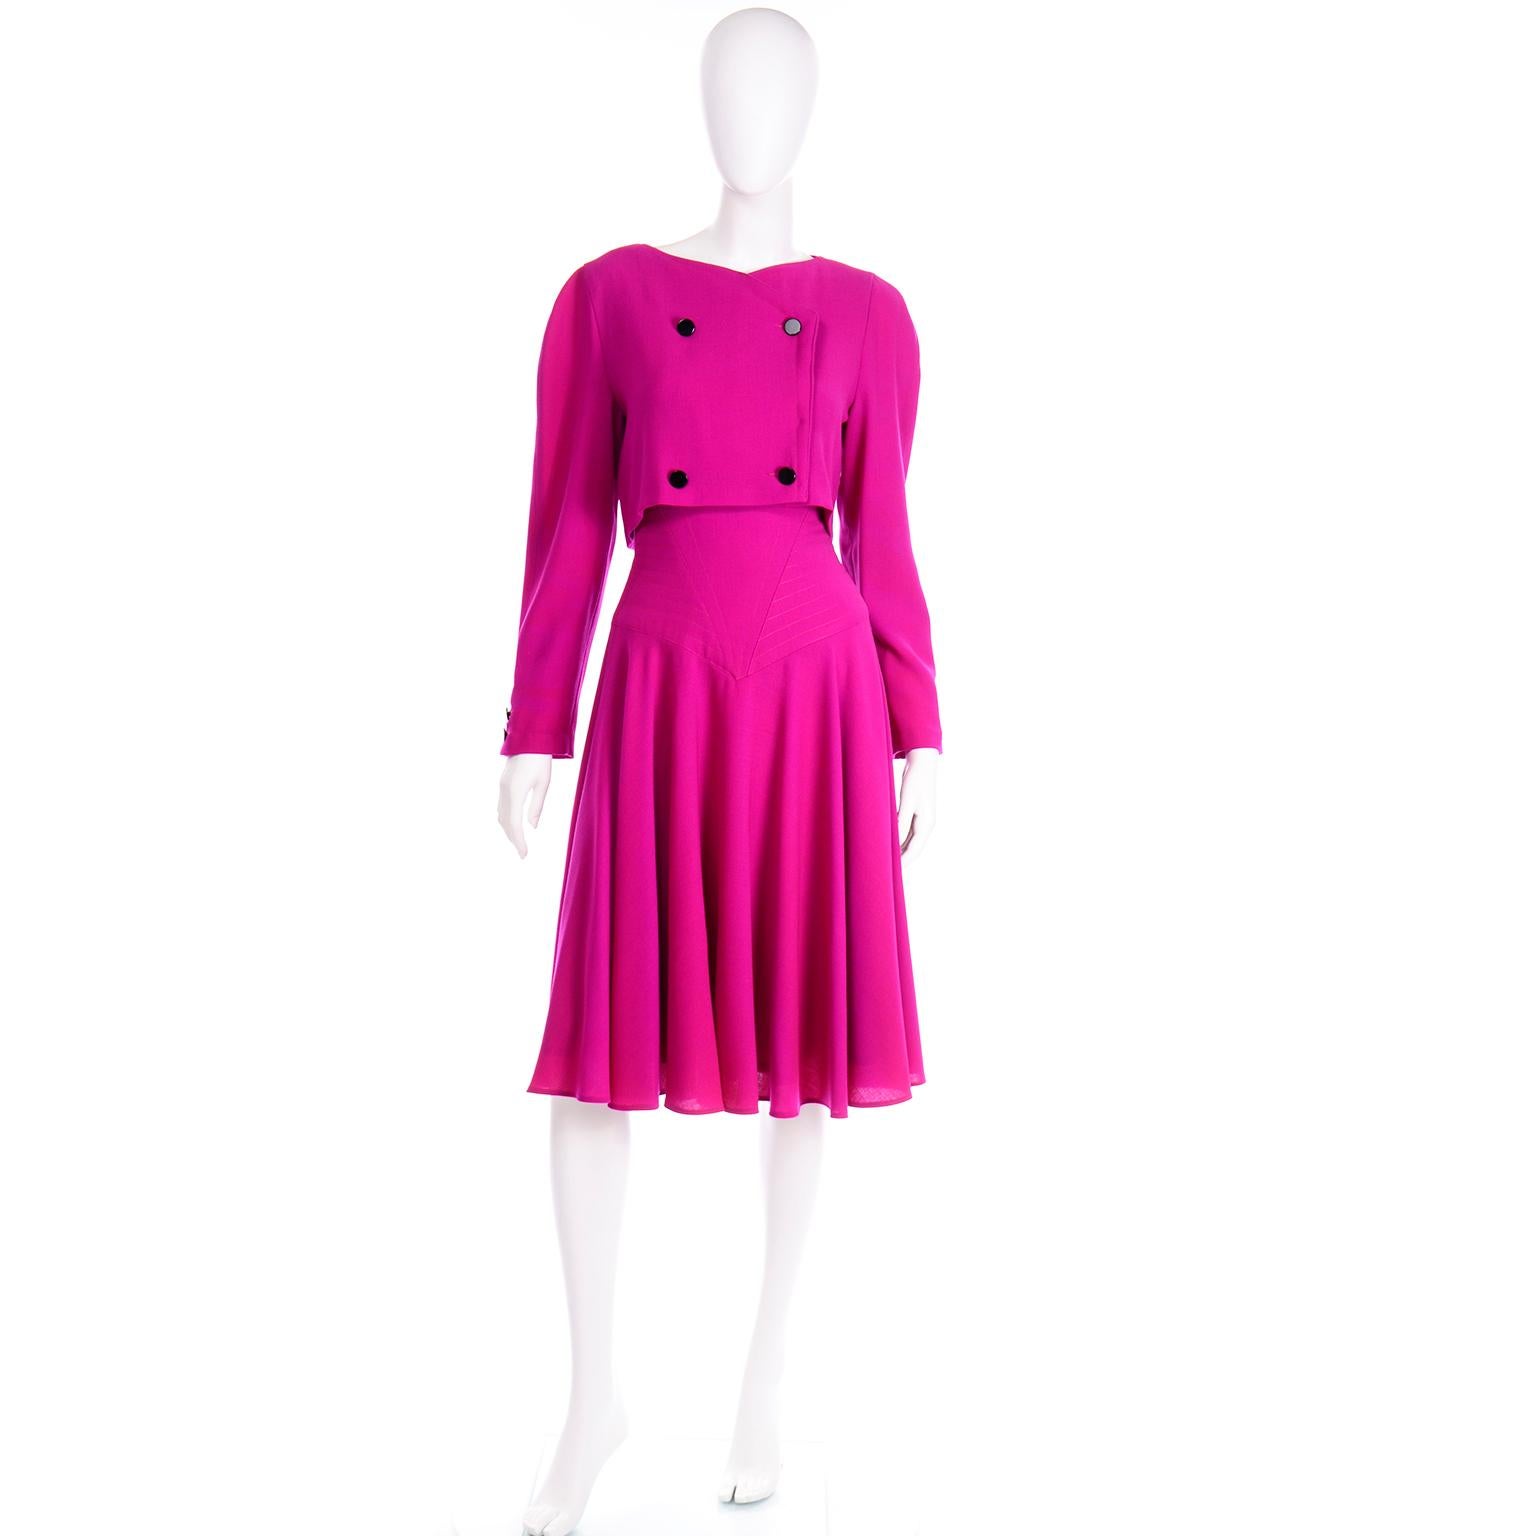 This incredible pink wool Louis Feraud dress is one of our favorites! The dress has a double breasted front detail with black enamel buttons. The back of the dress has black buttons from the nape of the neck down to the hem of the shirt. The top of